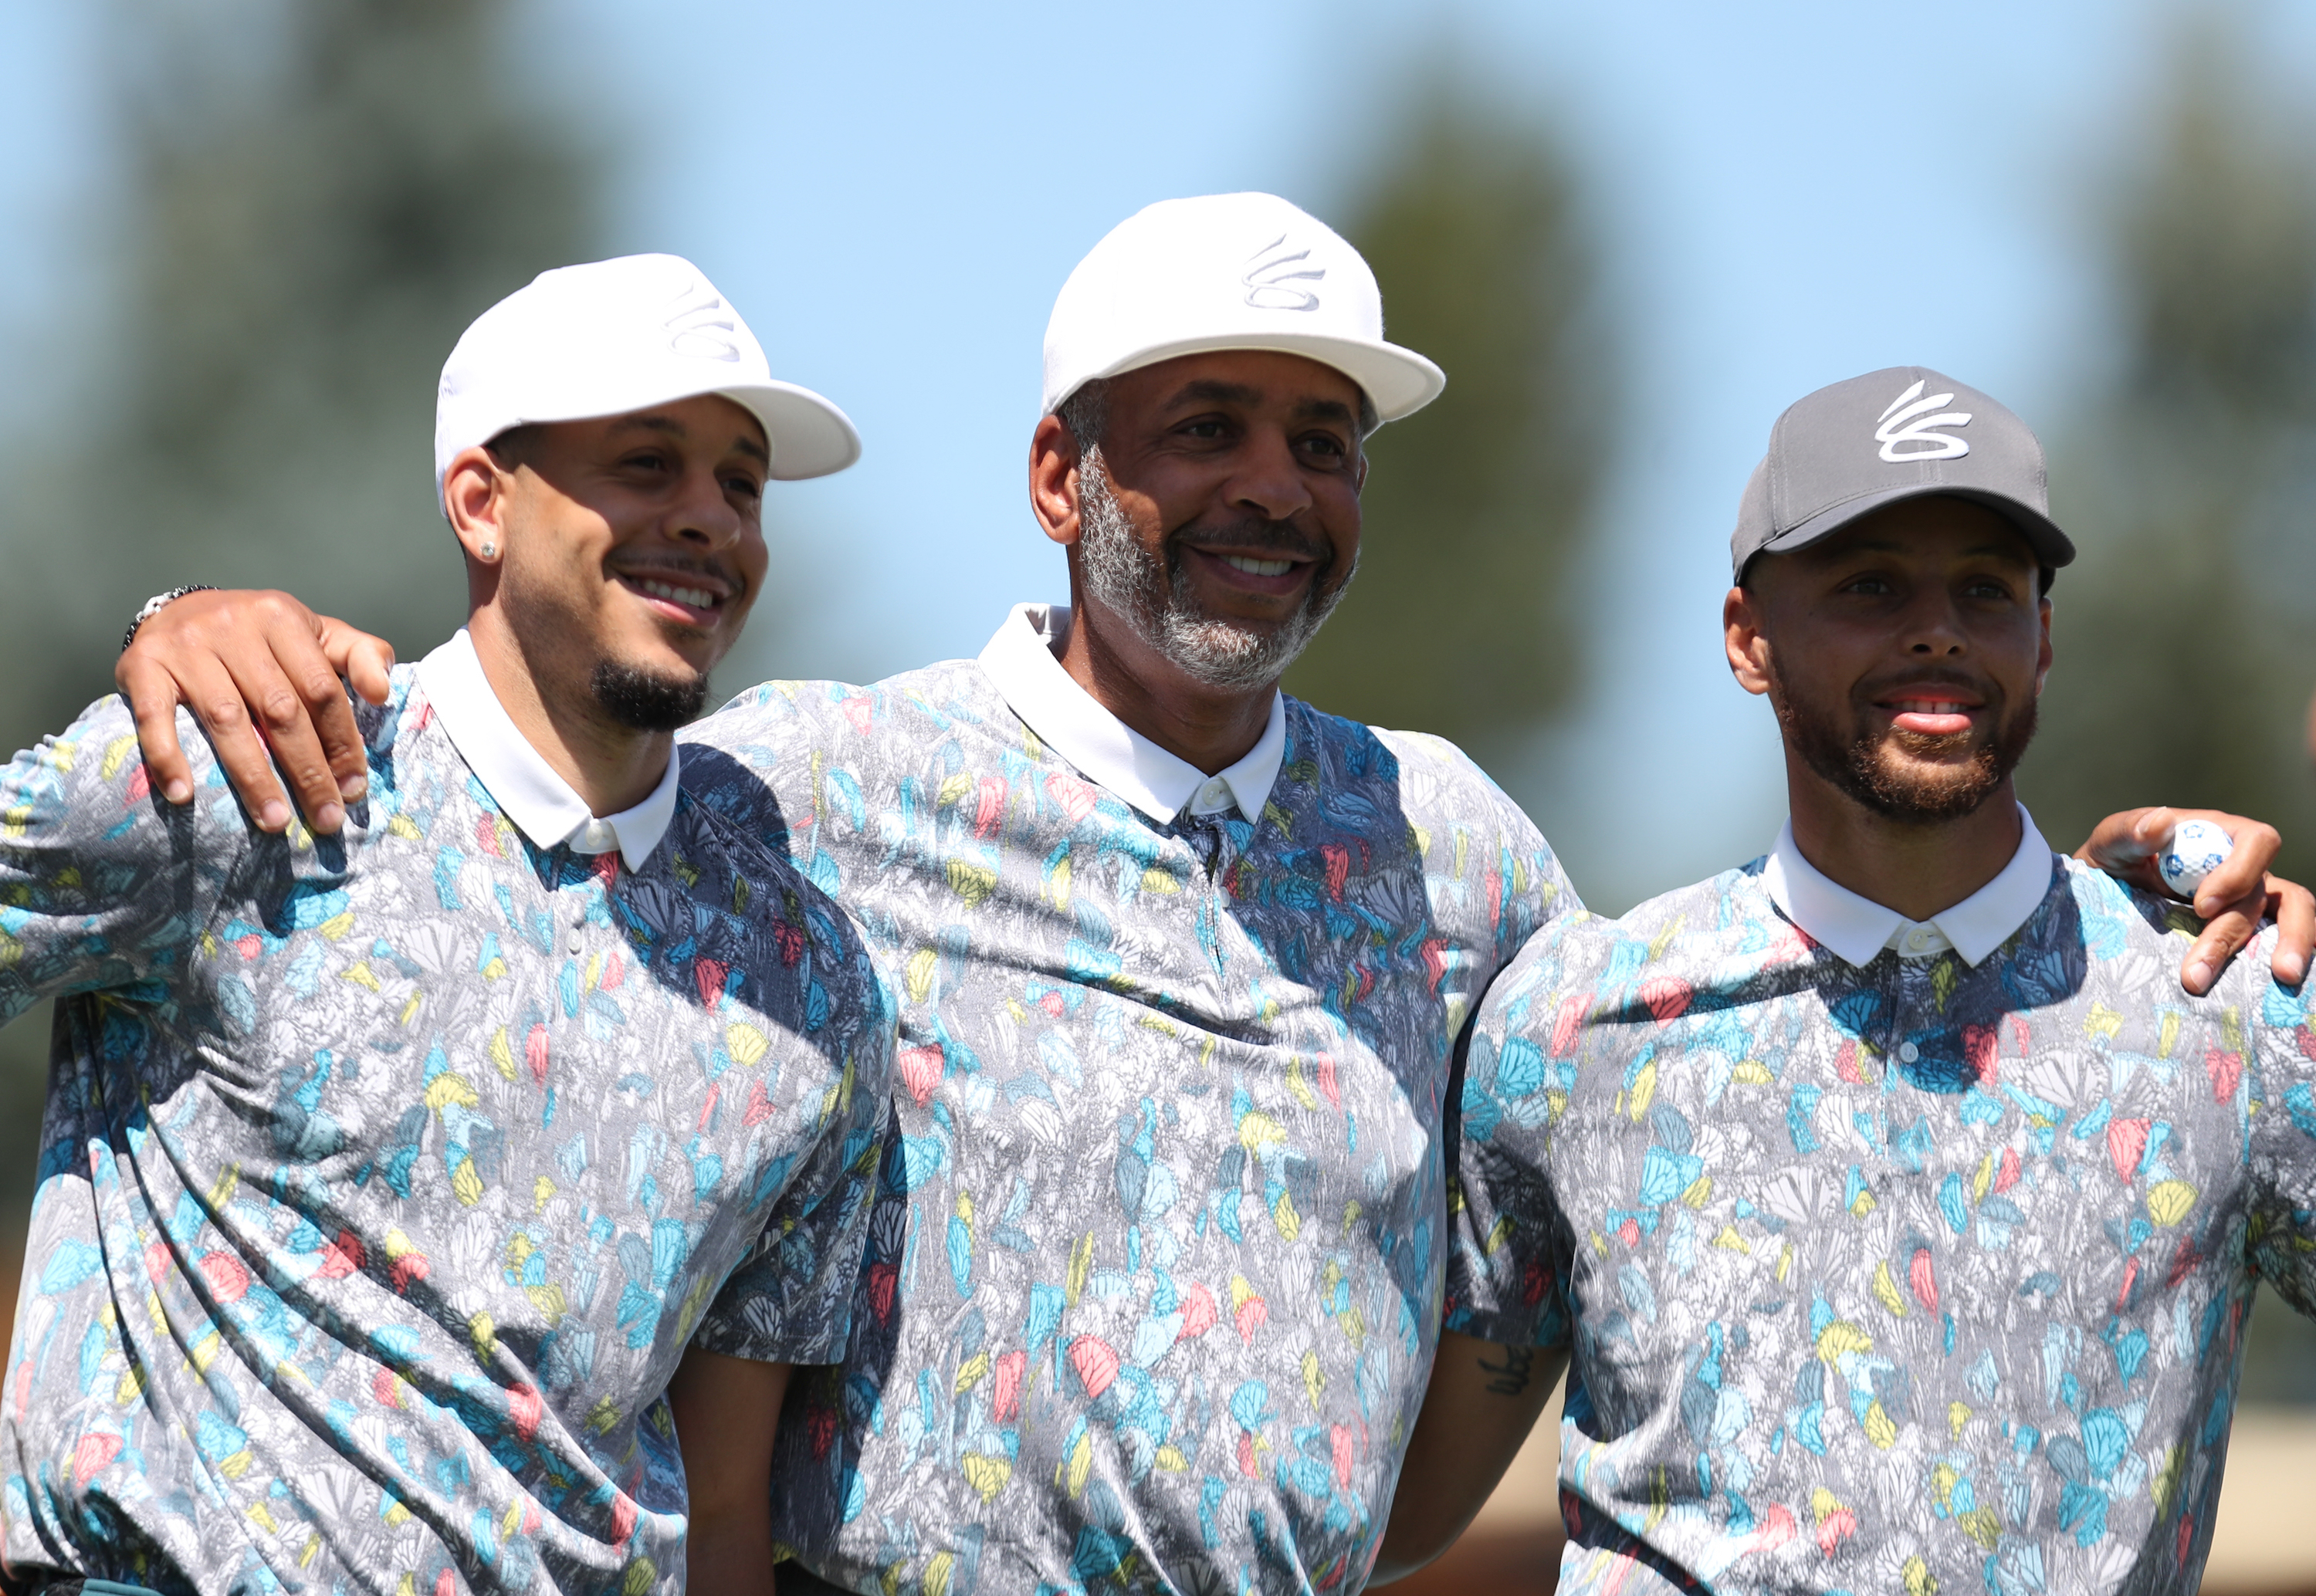 L-R: Seth Curry, Dell Curry, and Stephen Curry pose for a photo at the American Century Championship in July 2020